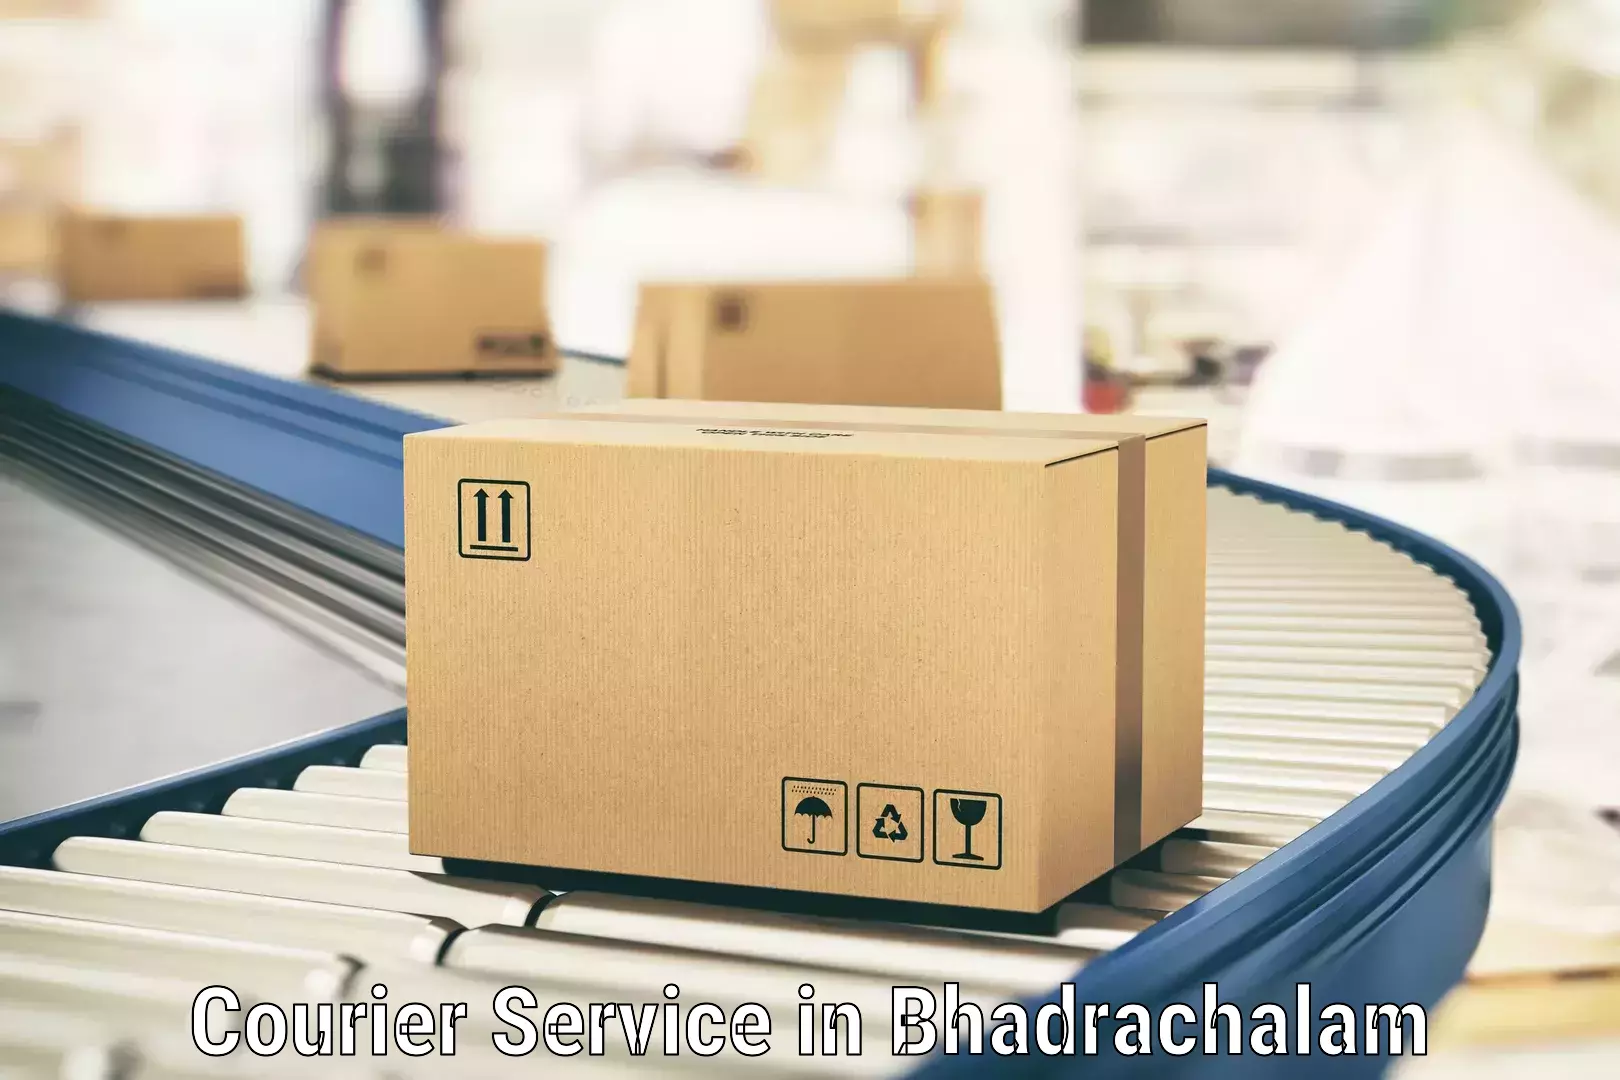 Large-scale shipping solutions in Bhadrachalam